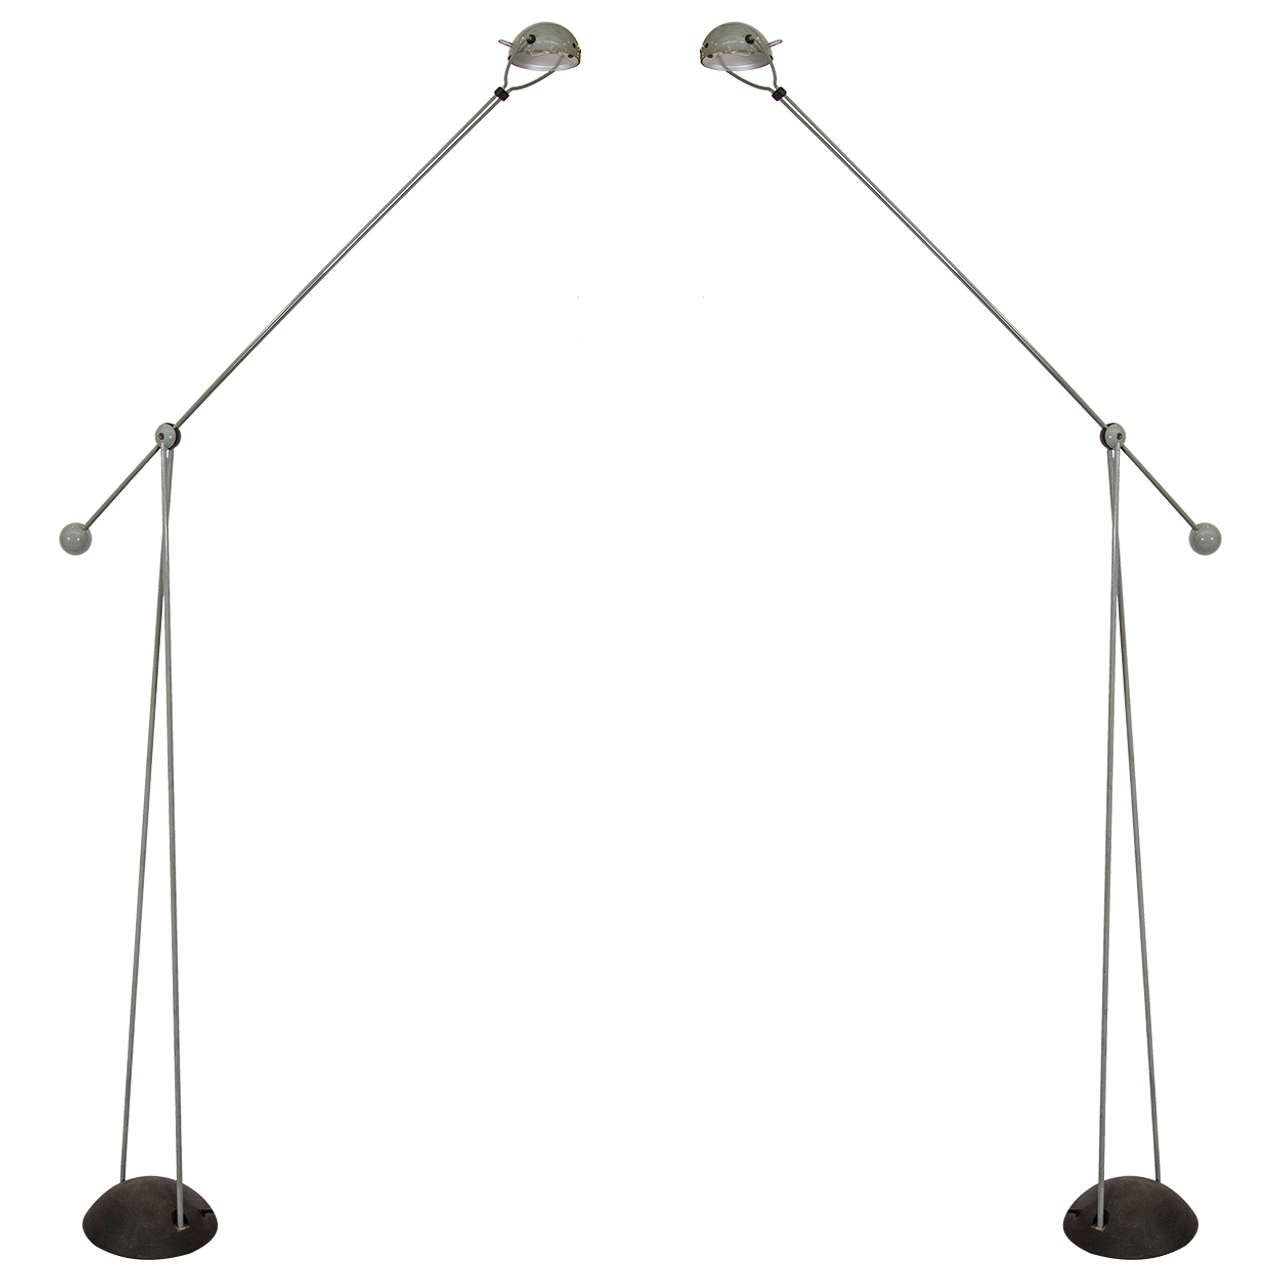 Pair of Paolo Francesco Piva Articulating Floor Lamps for Stafano Cevoli in Gray